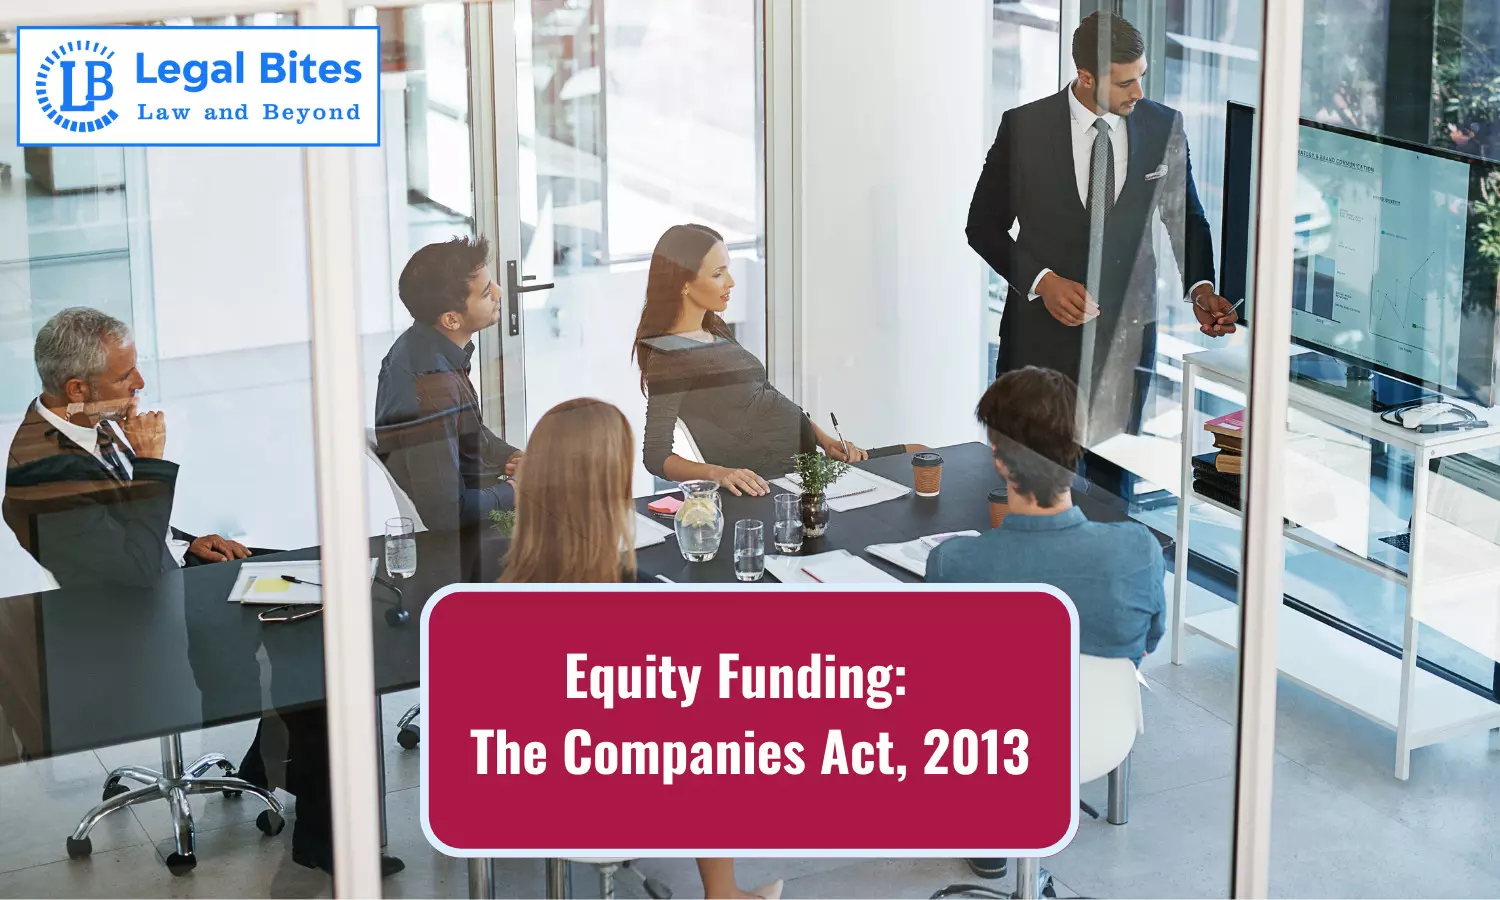 Equity Funding under The Companies Act, 2013